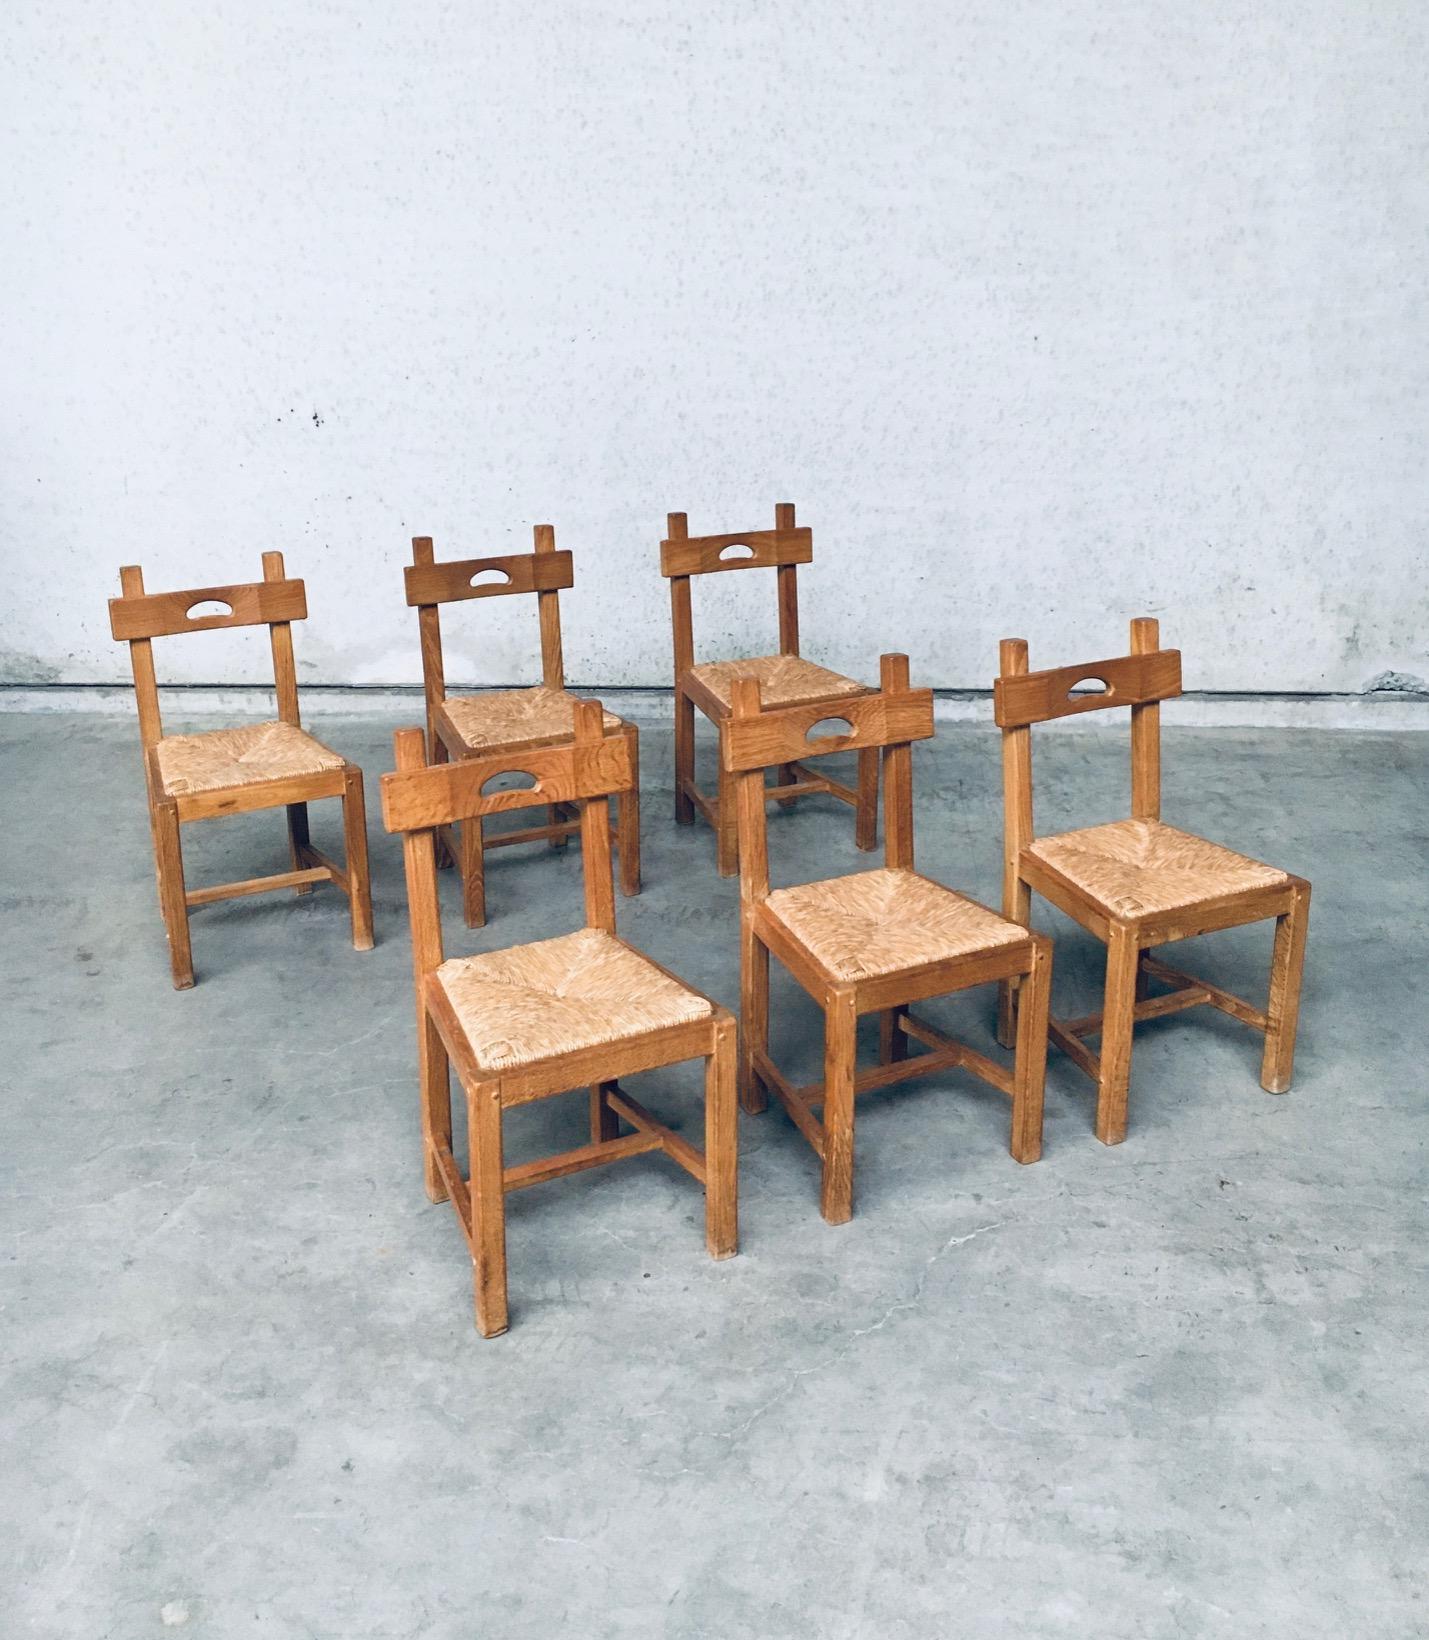 Vintage Brutalist in design Rustic Oak Dining Chair Set, made in Belgium 1960s. Solid oak constructed chairs with rush woven seats. These are all in very good, original condition. Each chair measures 87cm x 45cm x 46cm.
Sold as a set of 6.